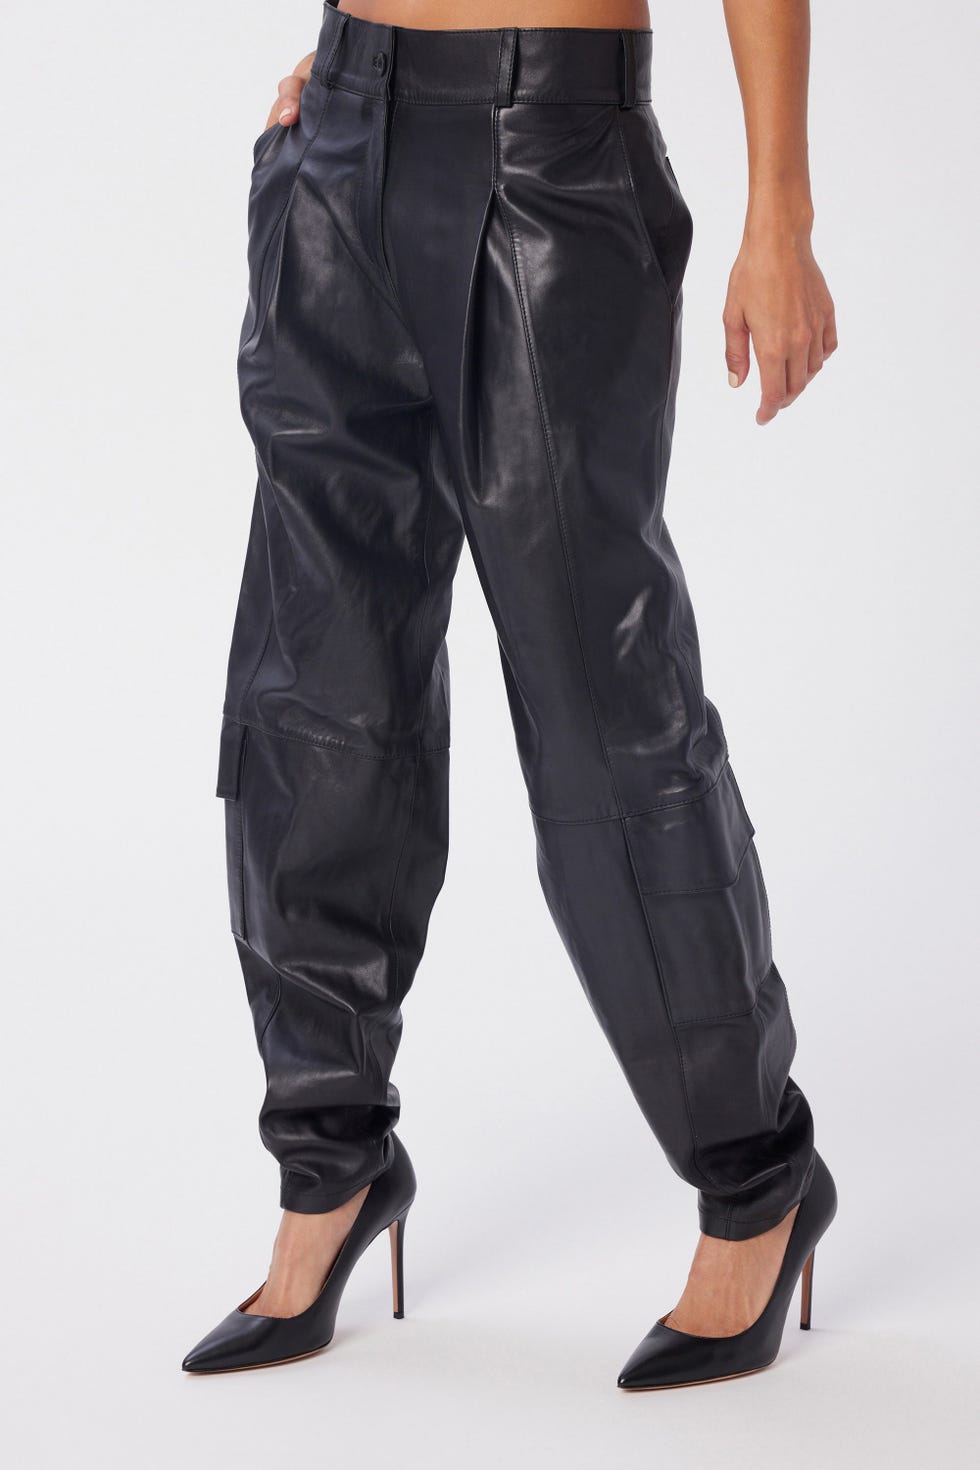 Lita by Ciara Balloon Pants in Leather